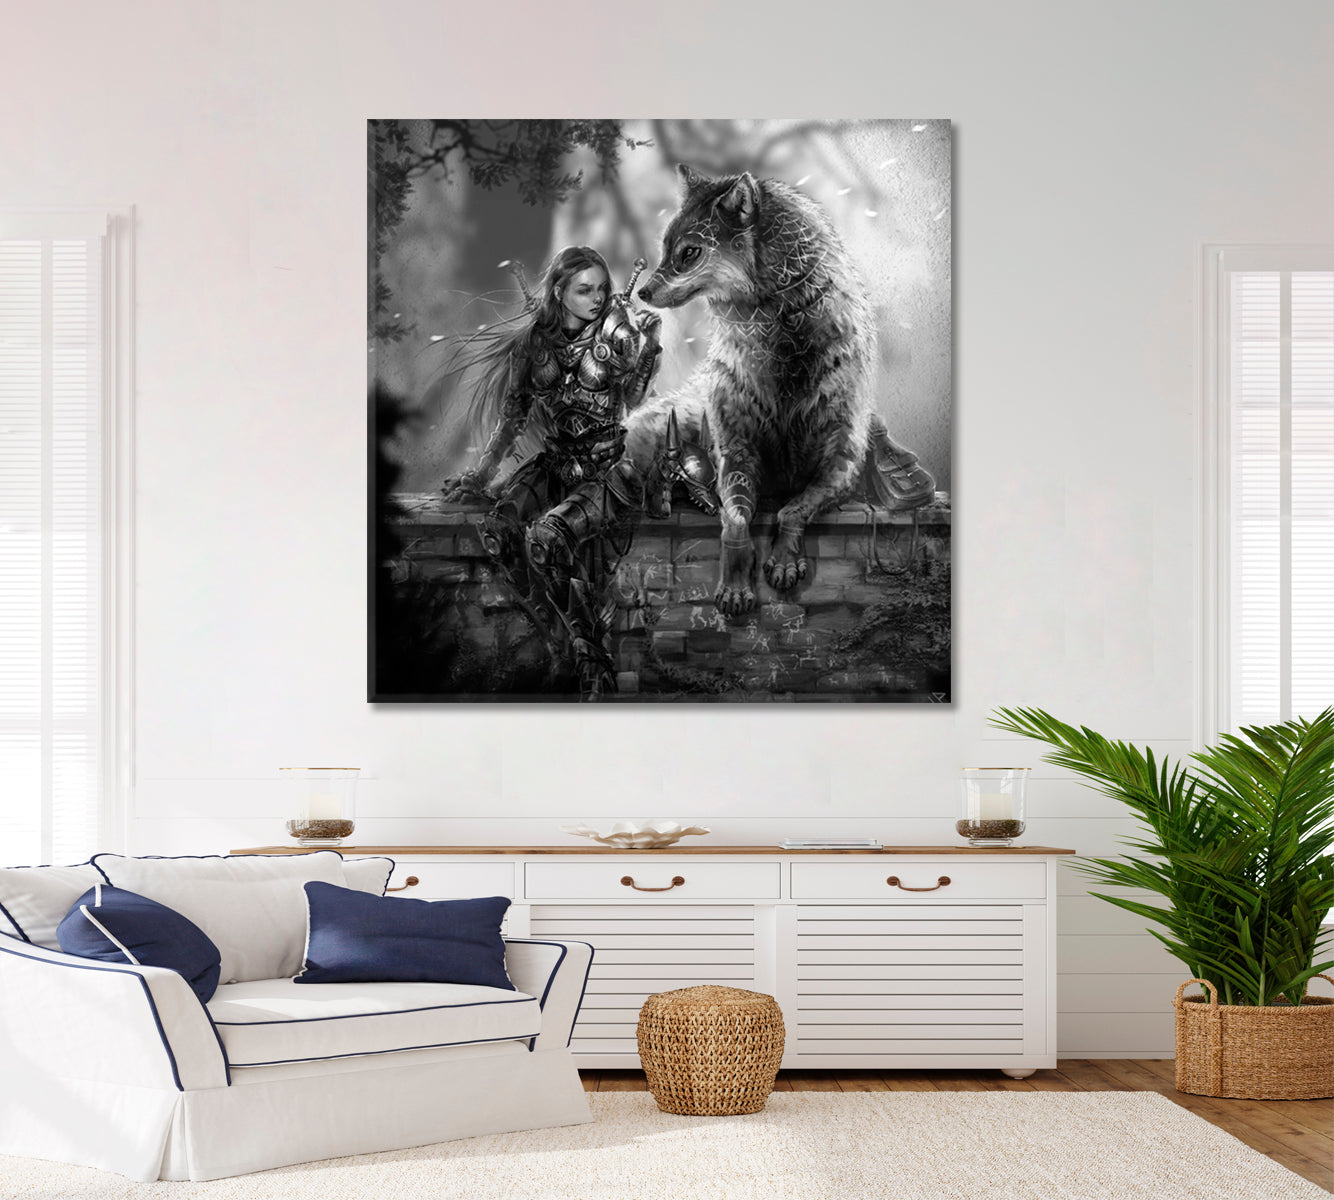 LADY OF WOLVES Mystical Woman Wild Wolf Fantasy Concept Canvas Print - Square Surreal Fantasy Large Art Print Décor Artesty   